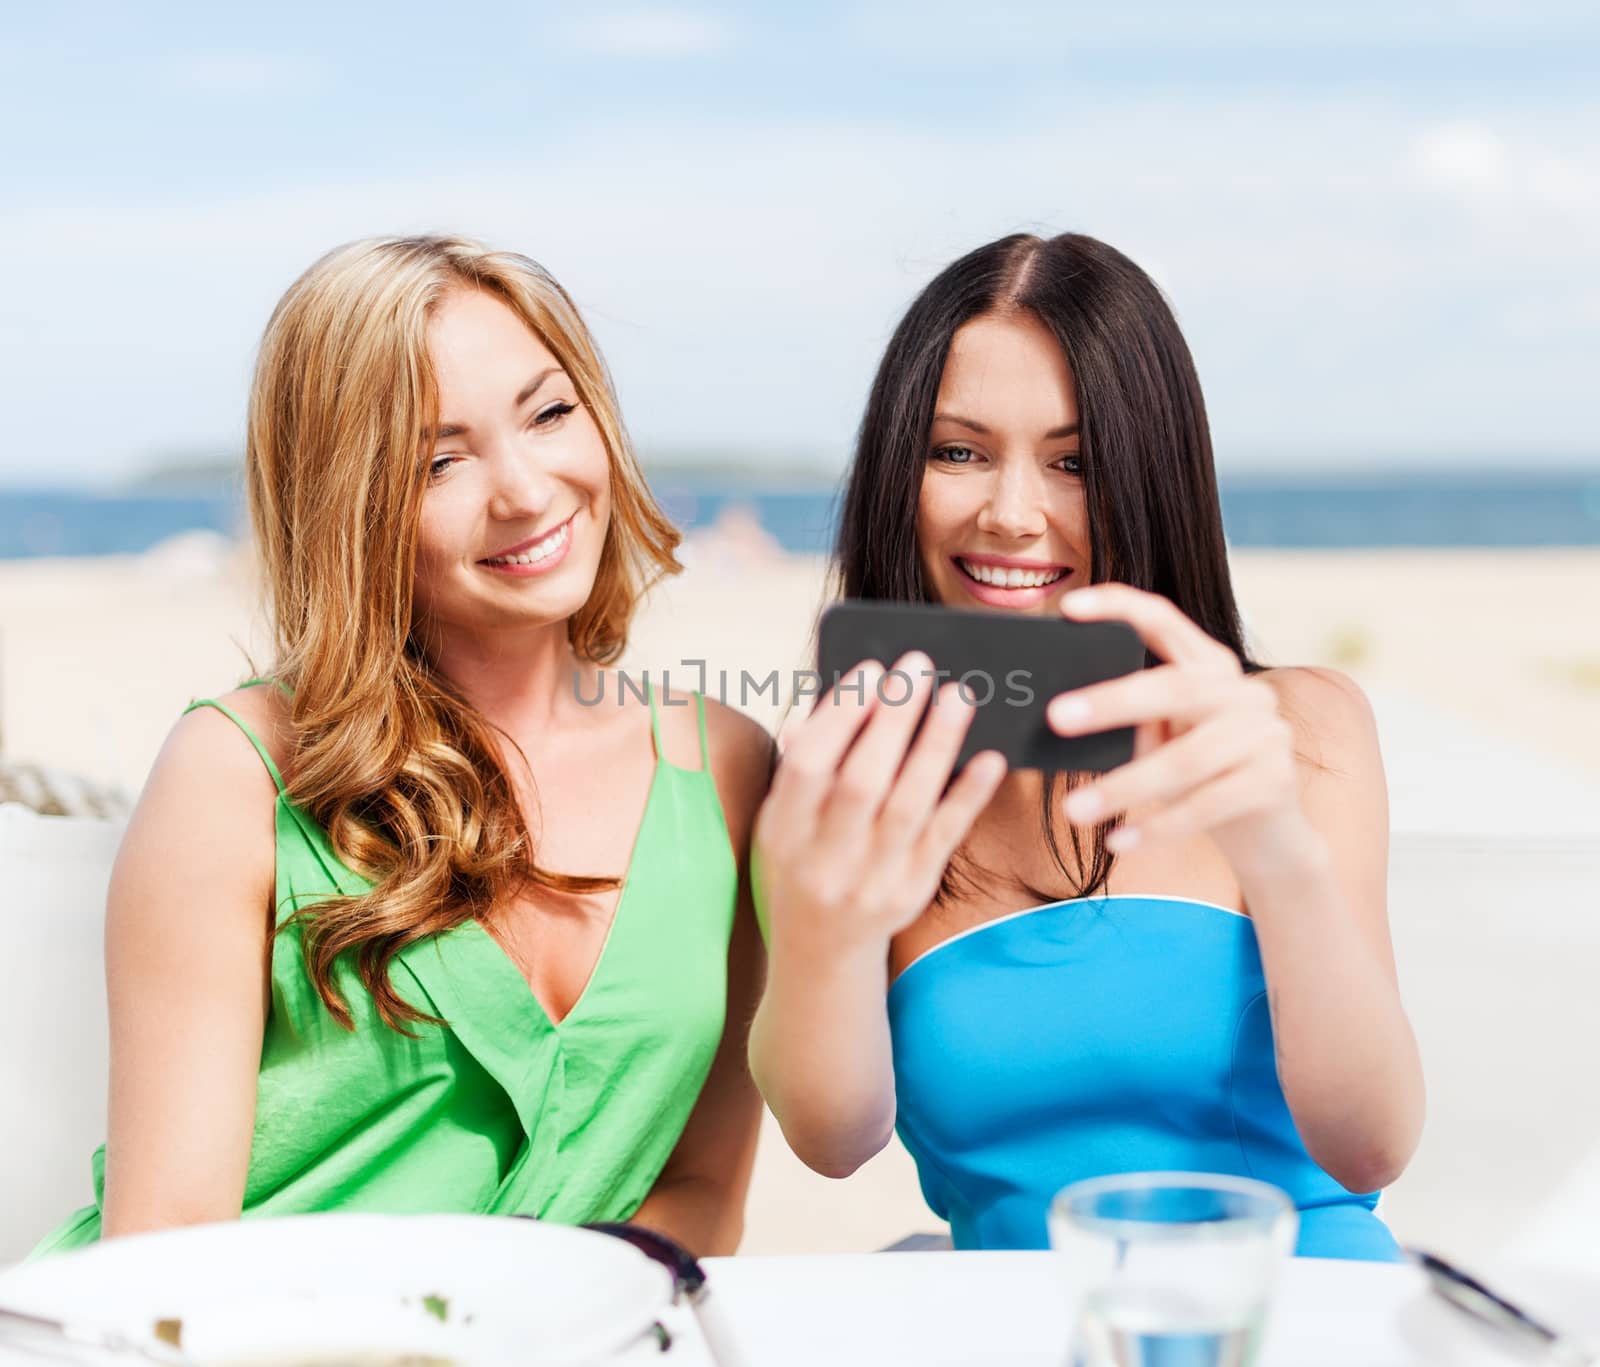 girls taking photo in cafe on the beach by dolgachov